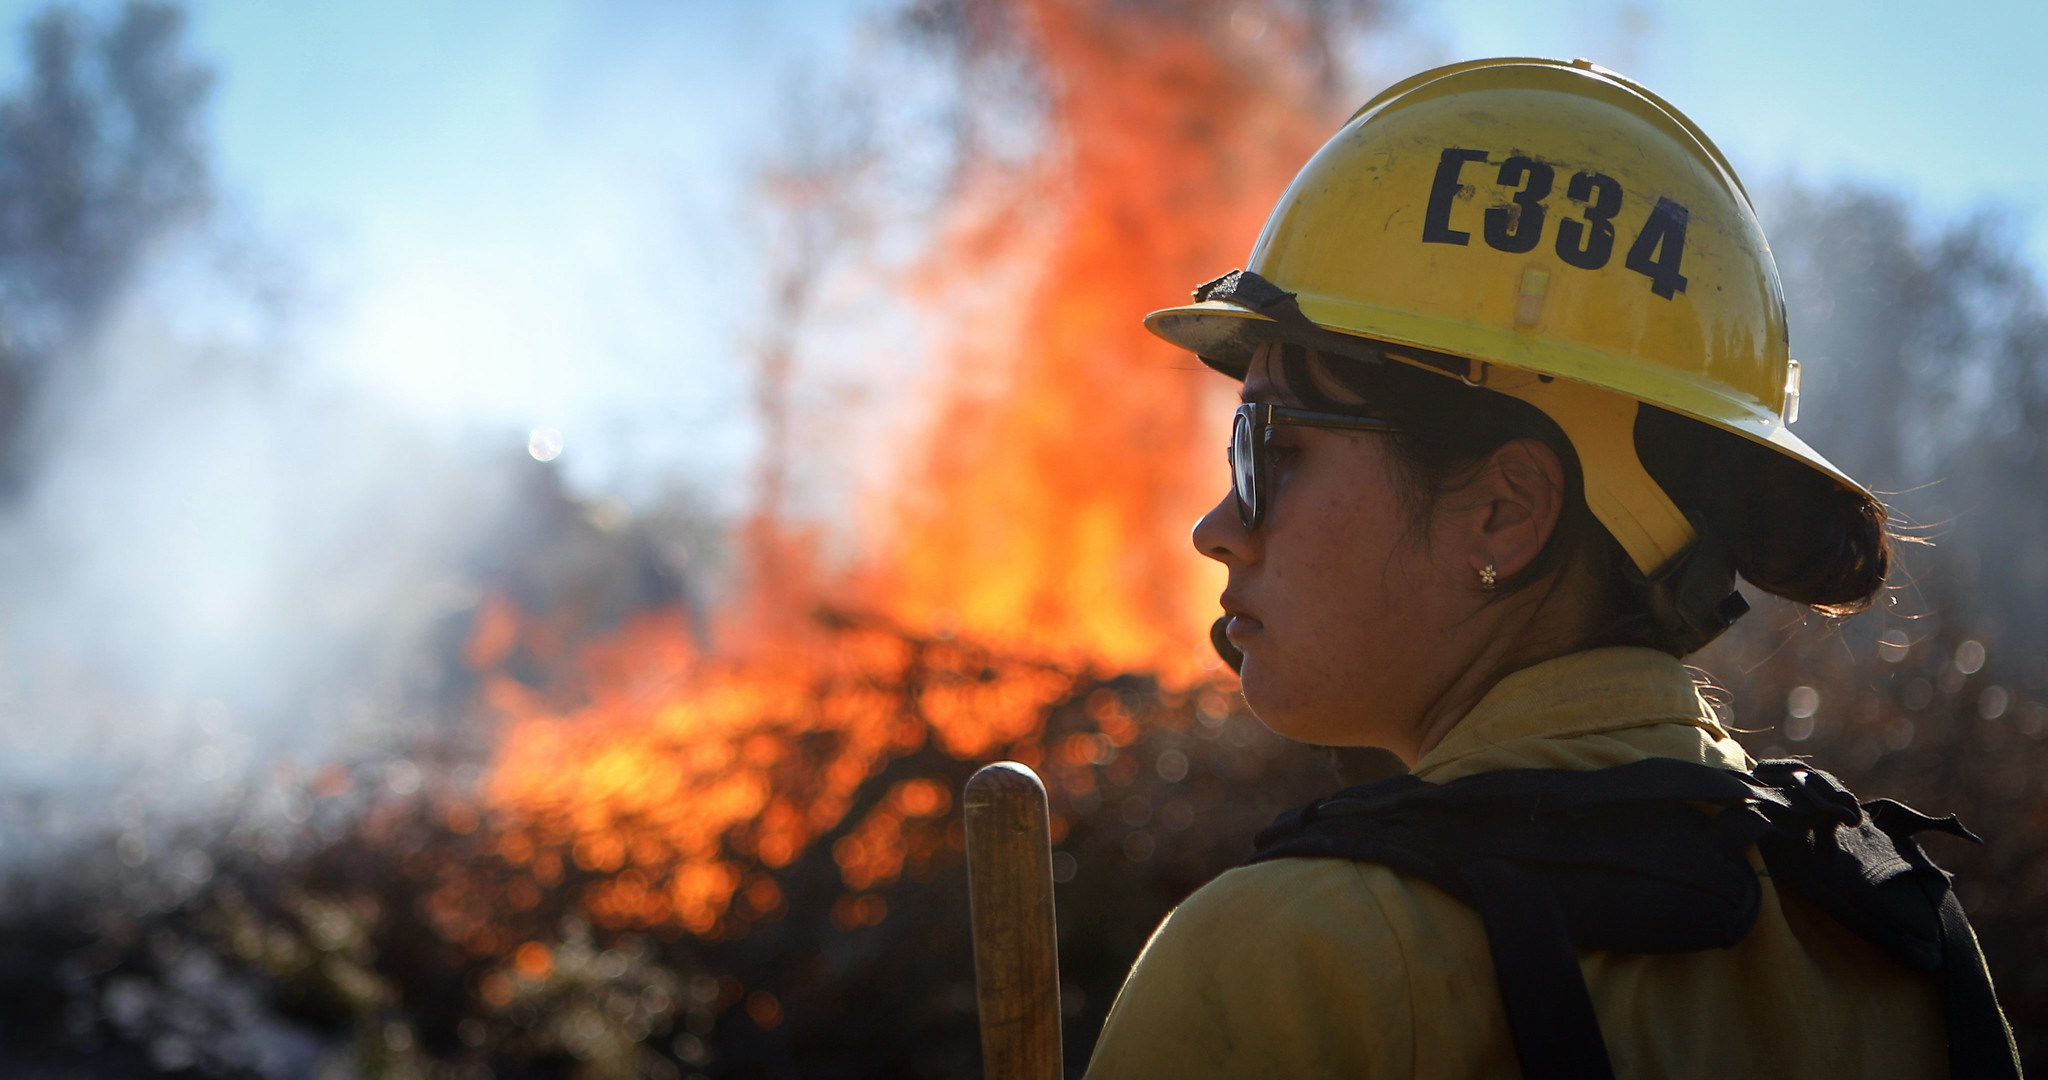 Firefighter in yellow hard hat with burning fire and brush in background.